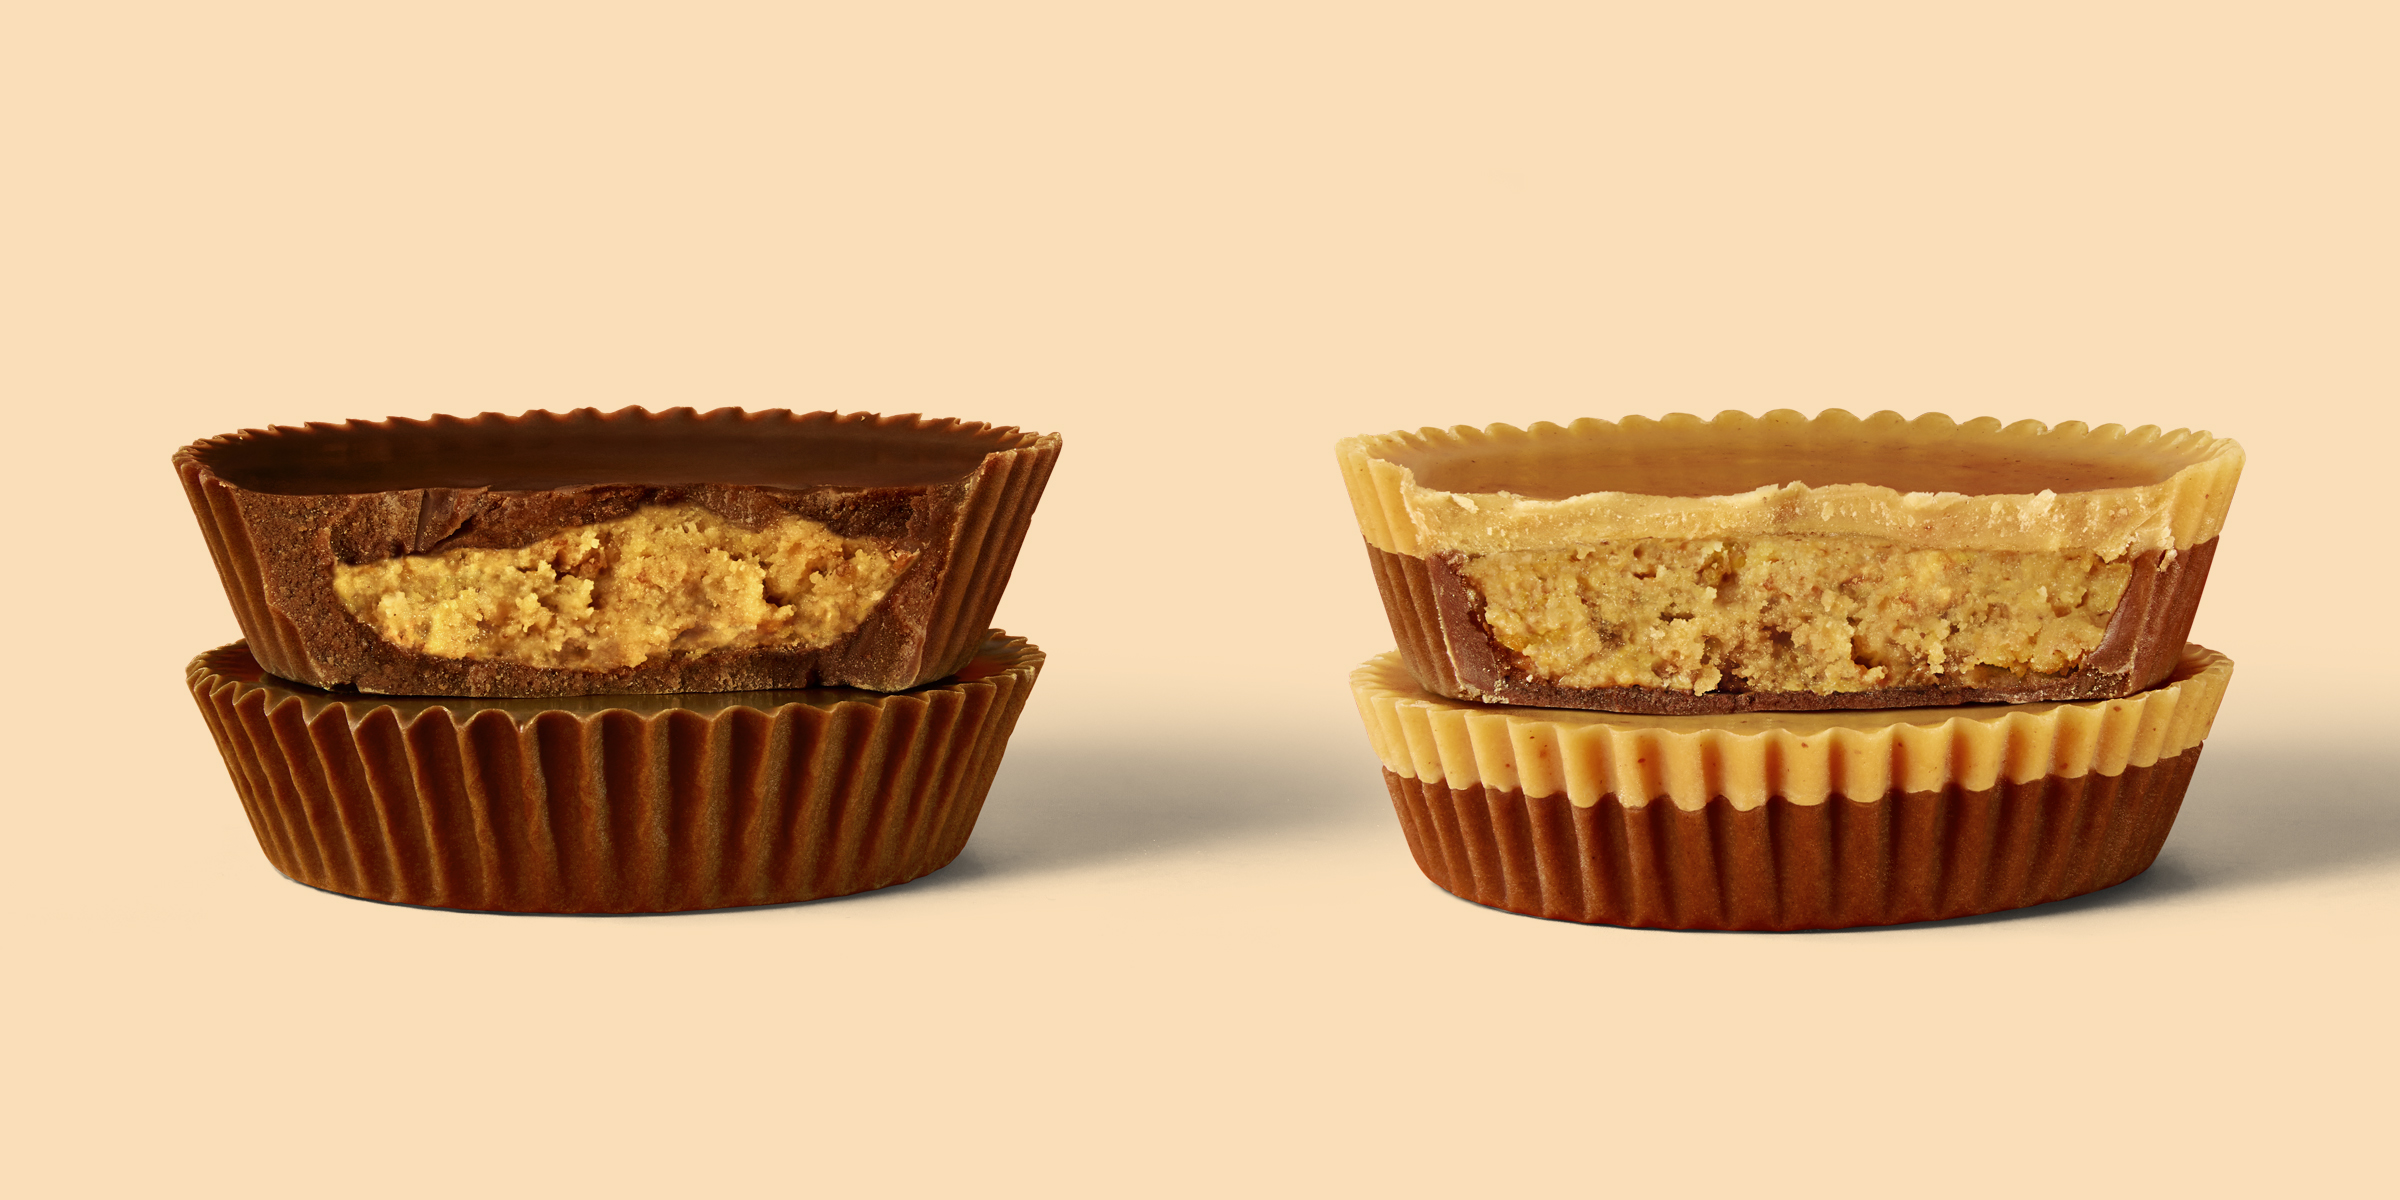 Two packs of peanut butter cups, a tempting treat that led to a lesson in listening to intuition.